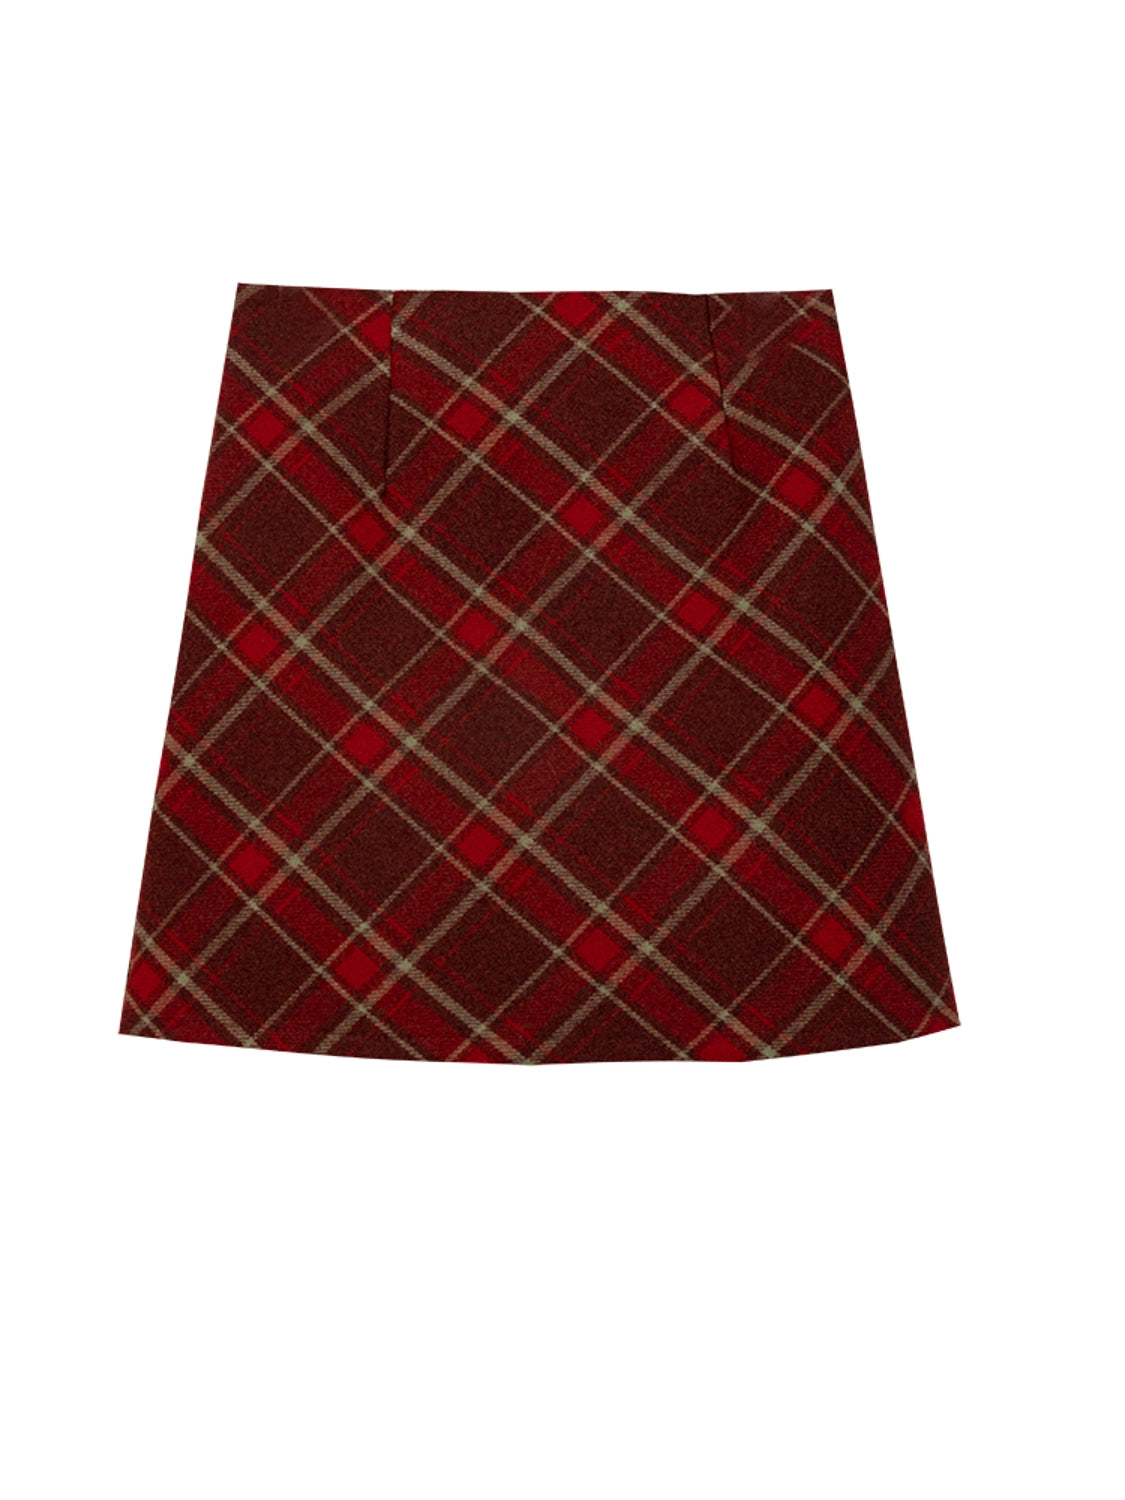 Women's Timeless Plaid Mini Skirt with A-Line Silhouette